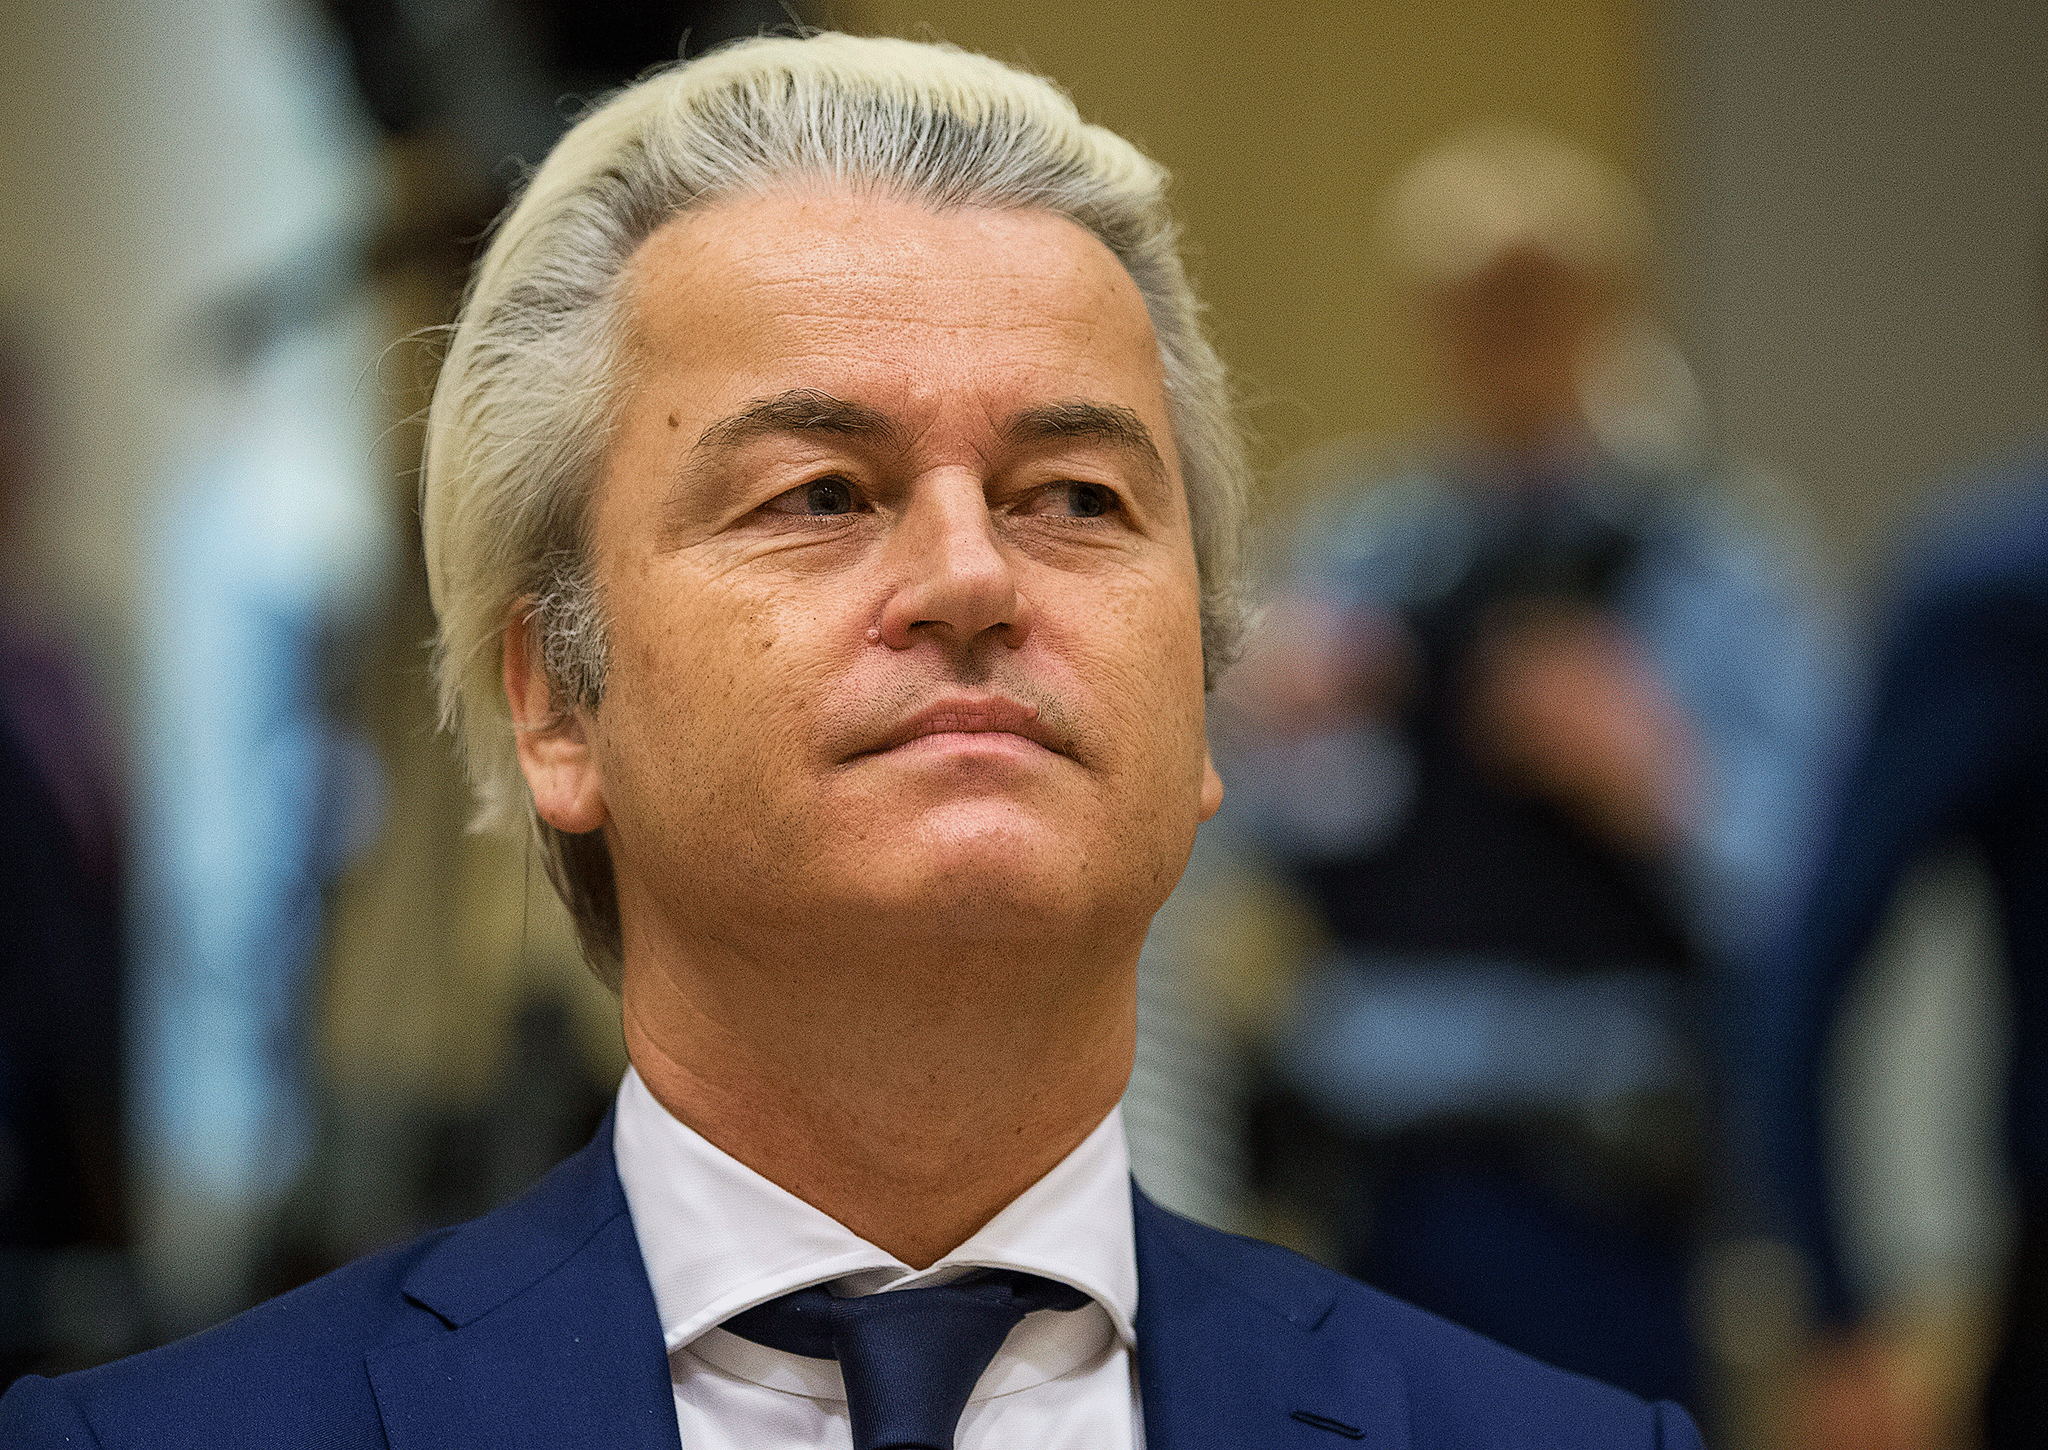 Dutch far-right politician Geert Wilders is one European politician hoping to capitalise on economic malaise and rising anti-immigrant sentiment